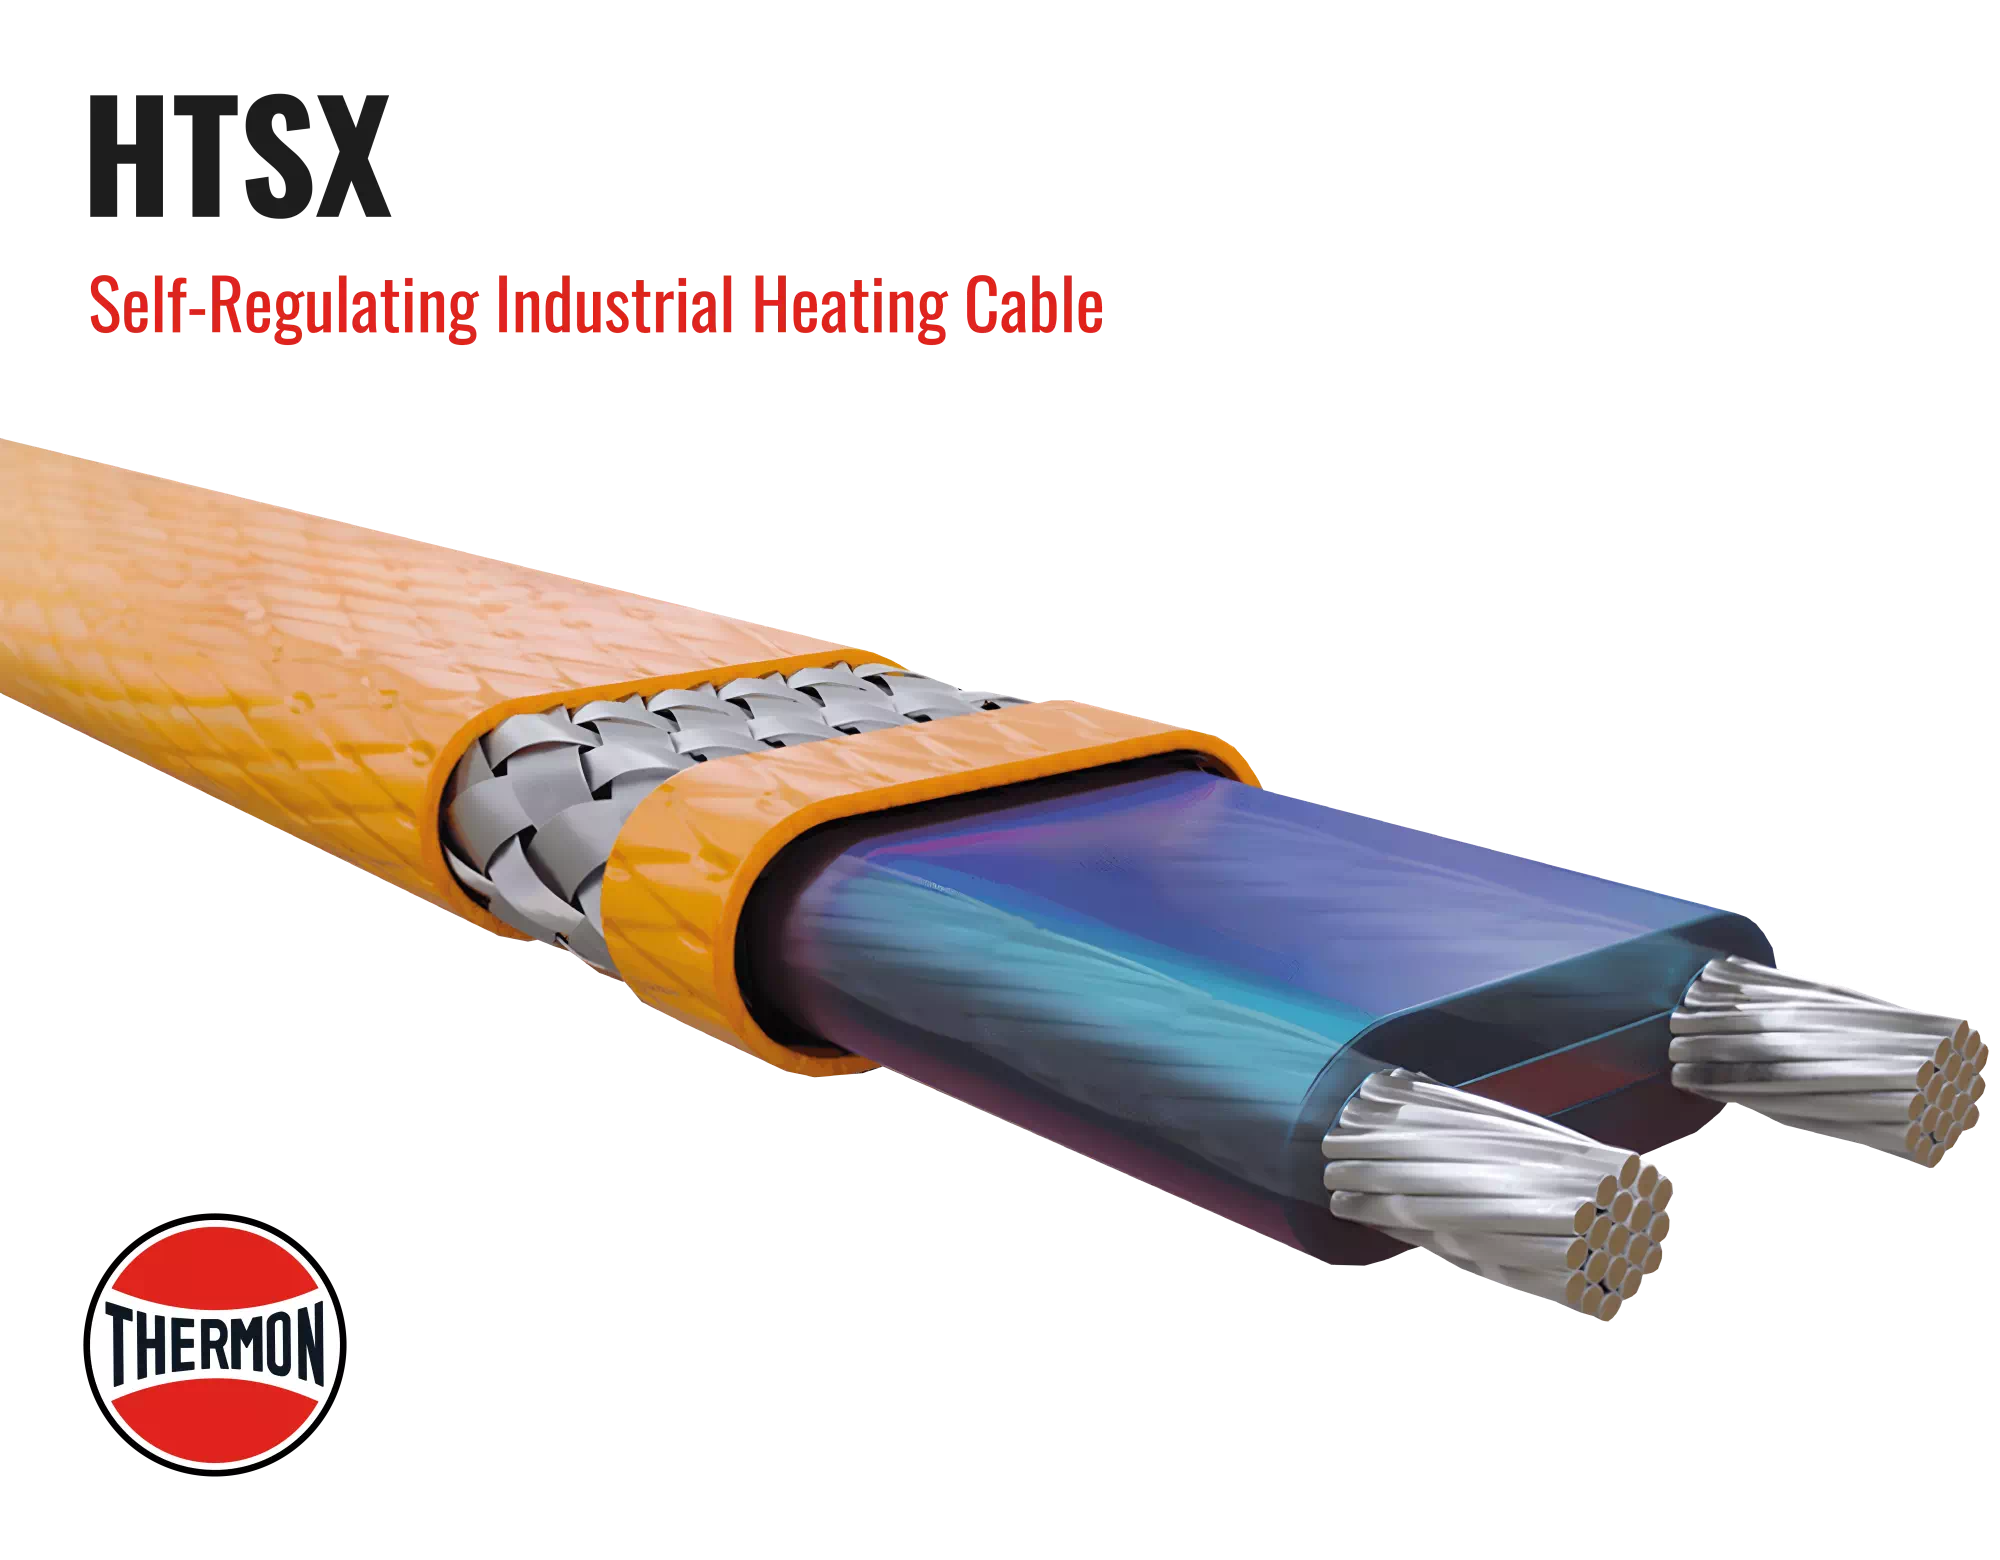 Thermon HTSX-Self-Regulating-Heat-Cable